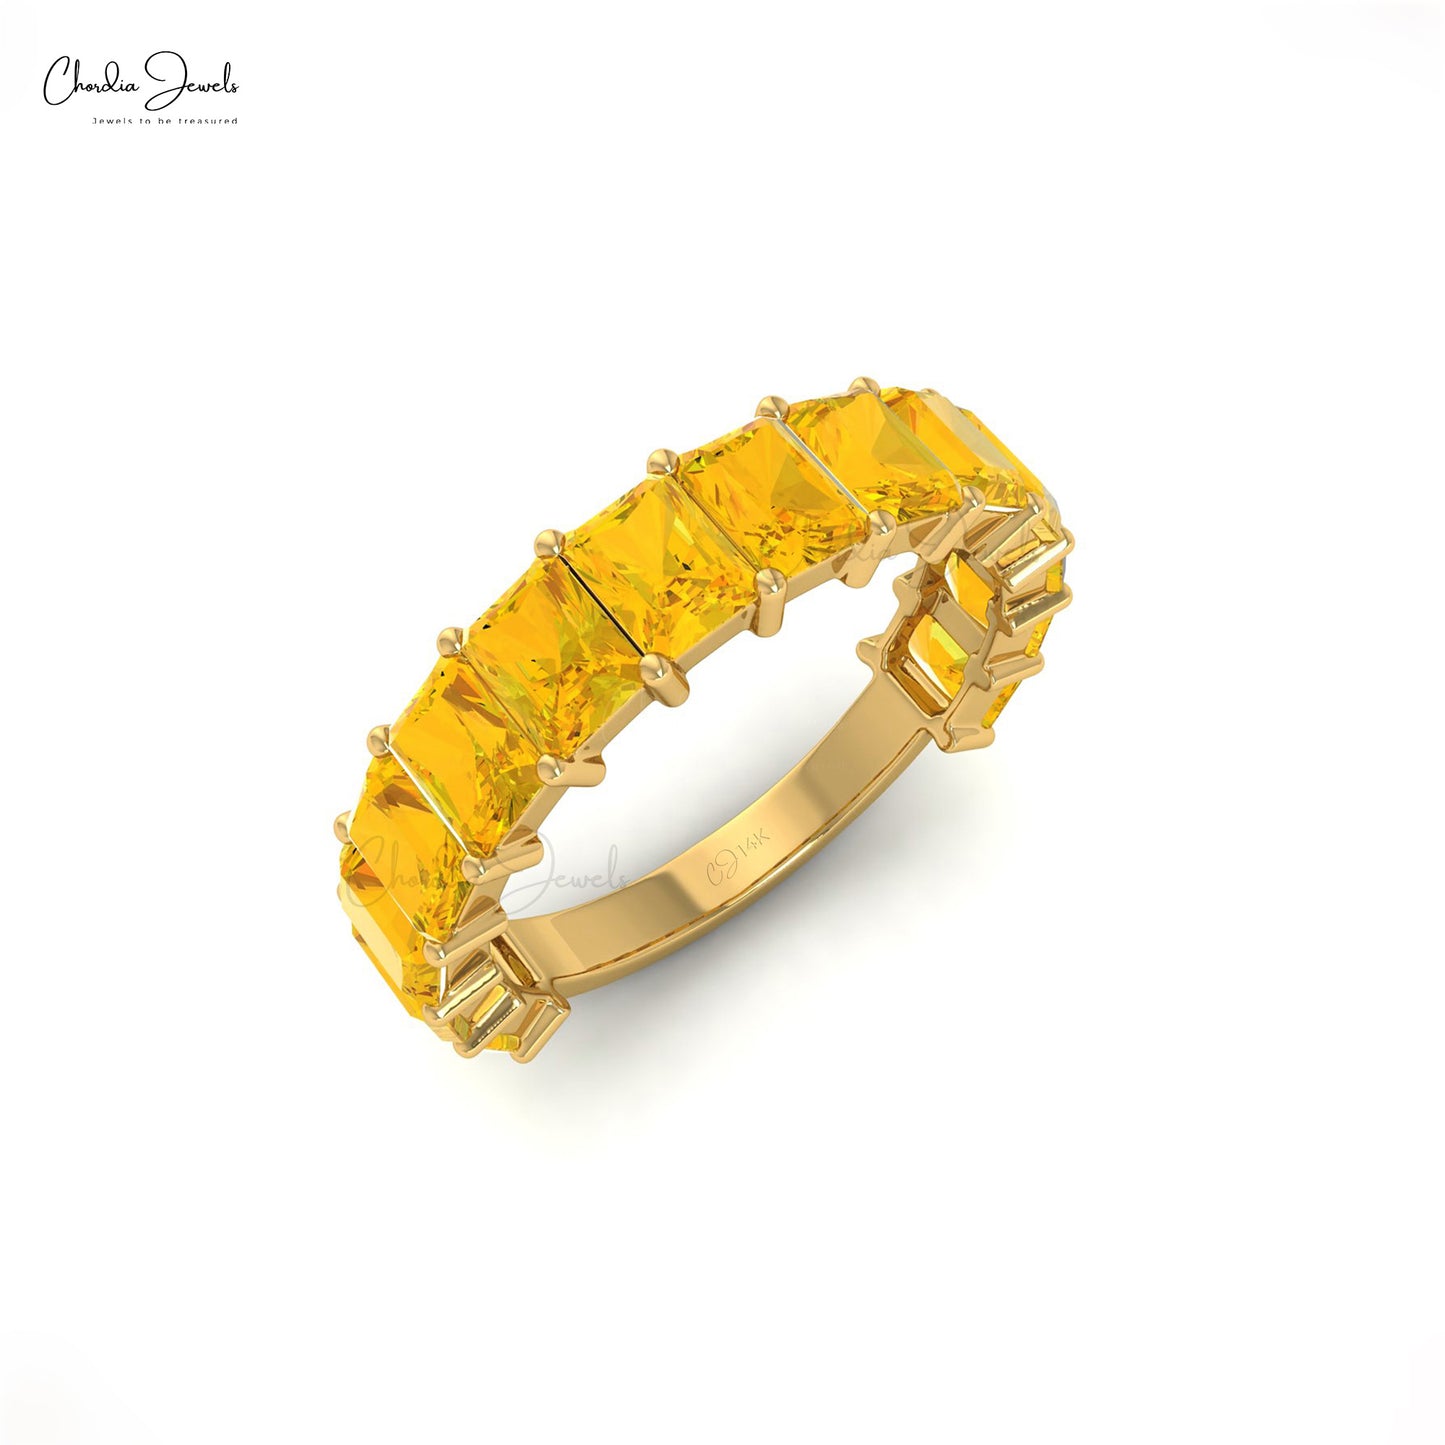 14k Solid Gold Gemstone Half Eternity Band For Her, 4x3 mm Octagon Cut Natural Citrine Band Ring For Women